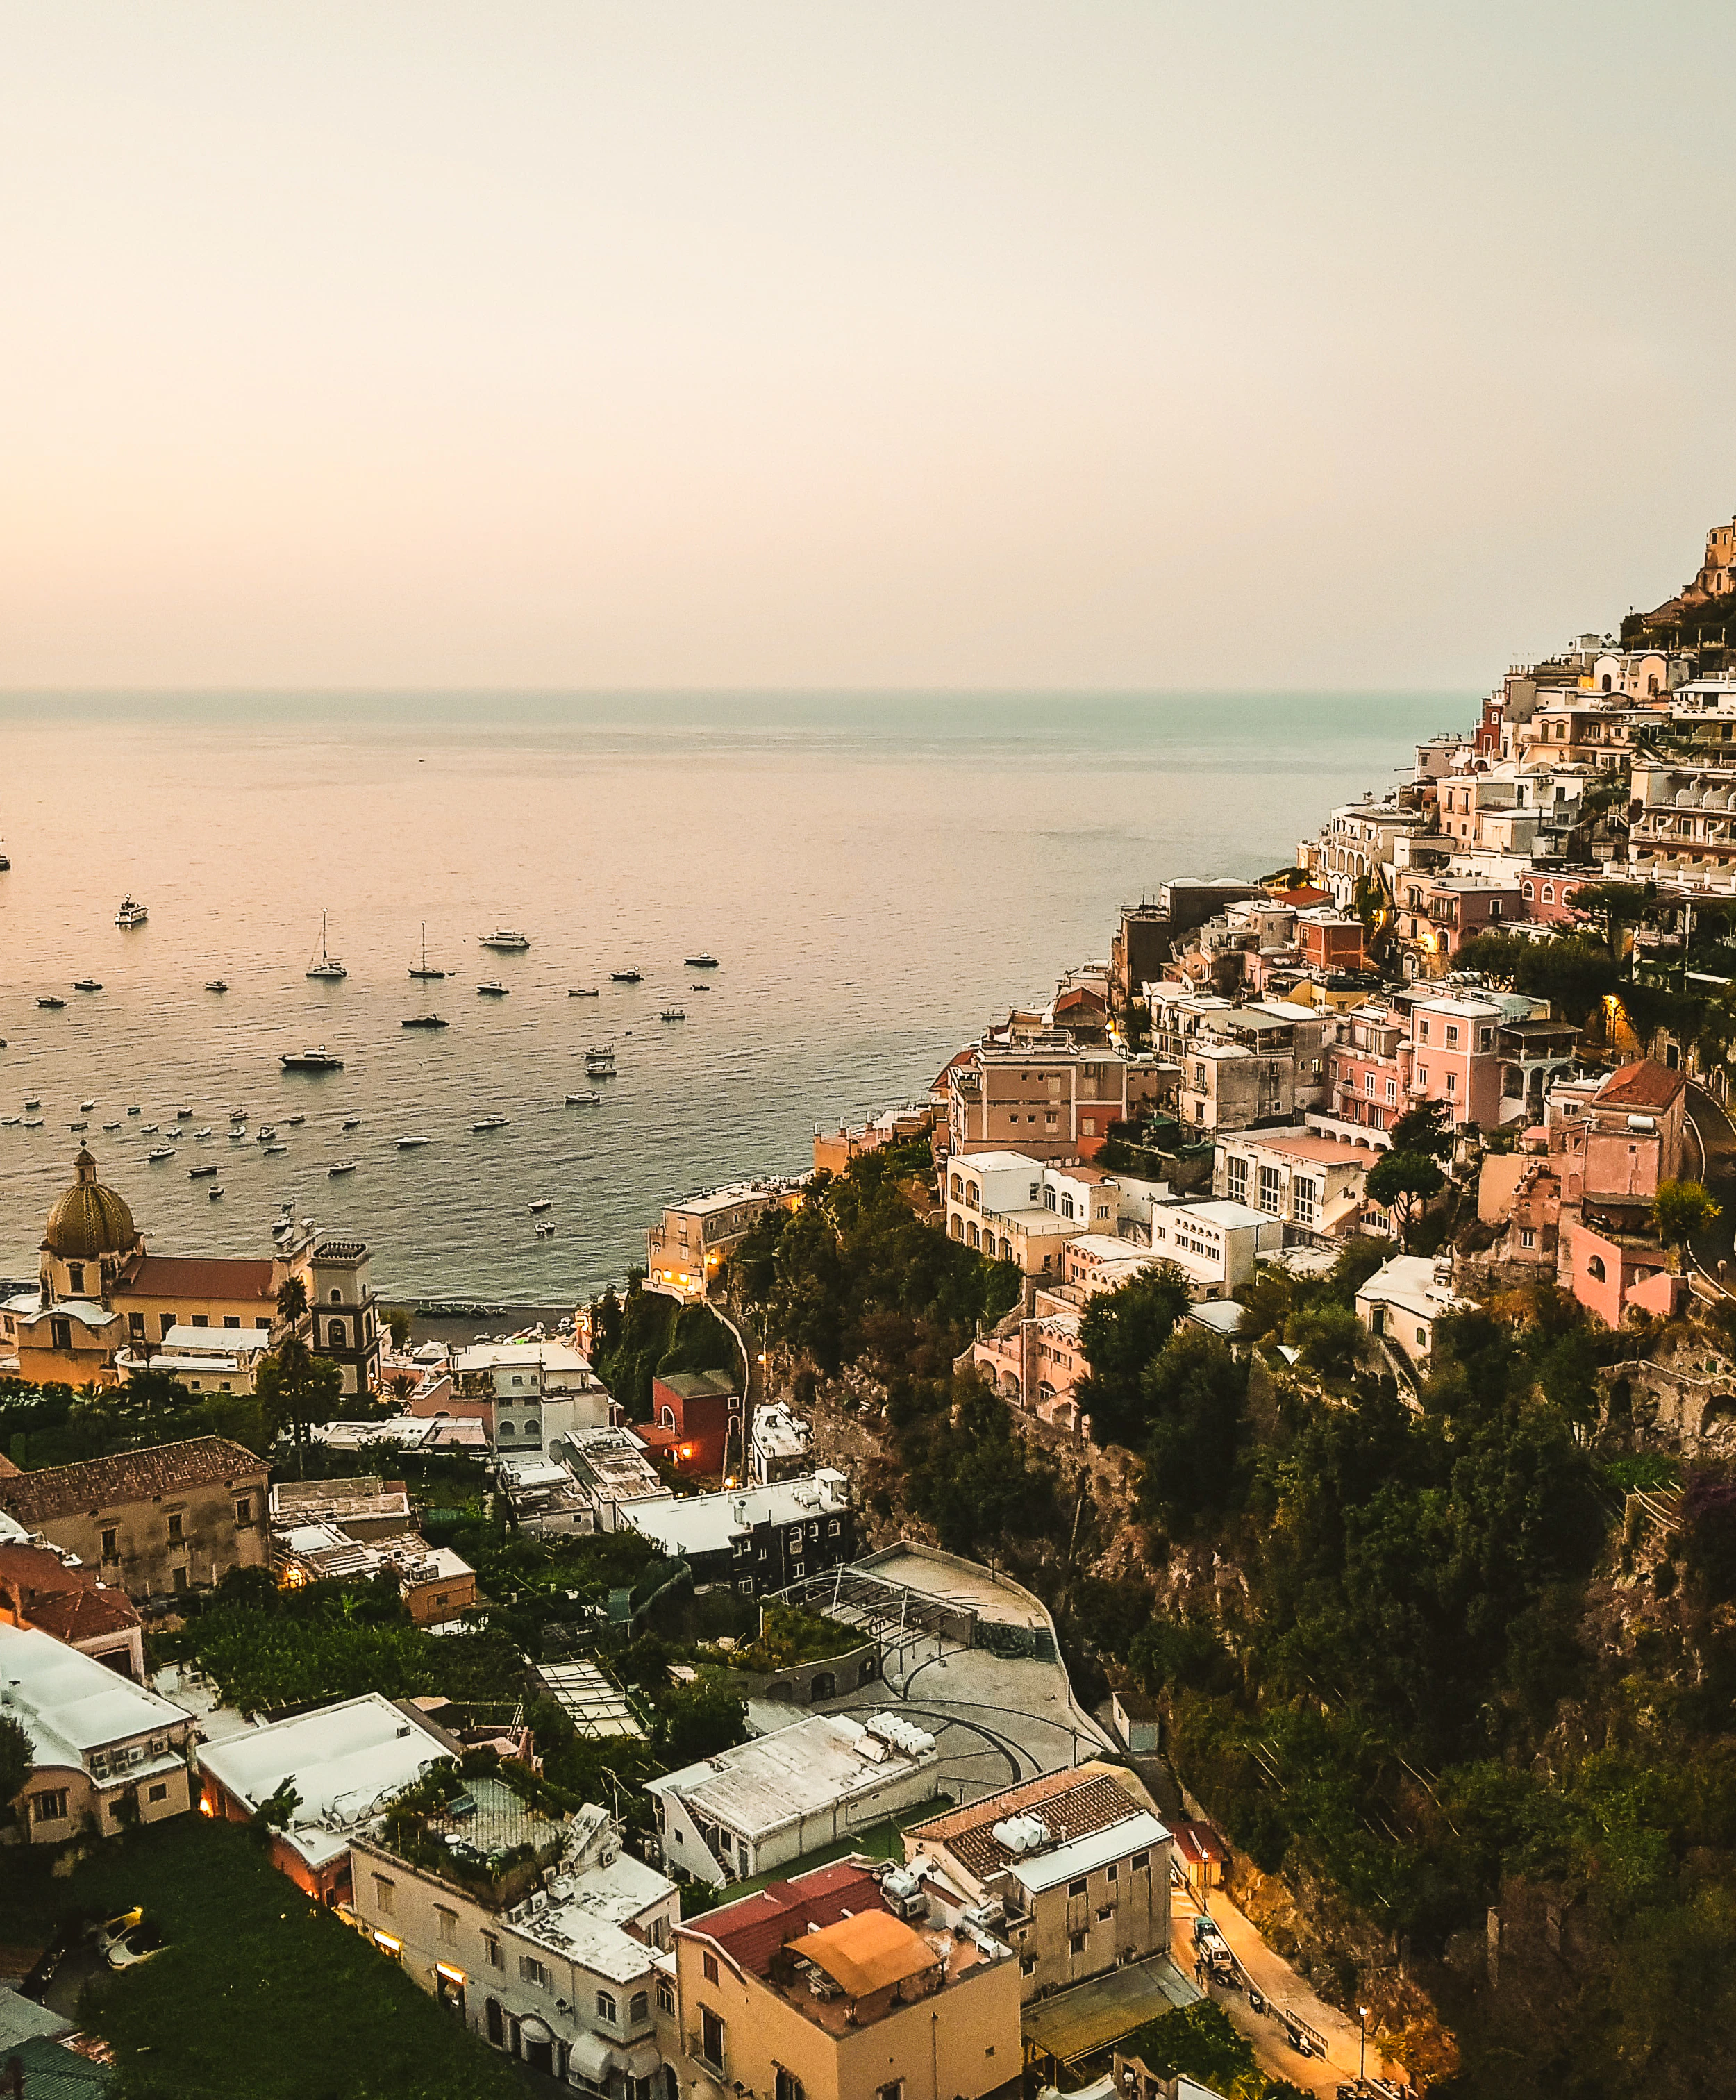 A village in on the Amalfi coast with the sea in the distance.